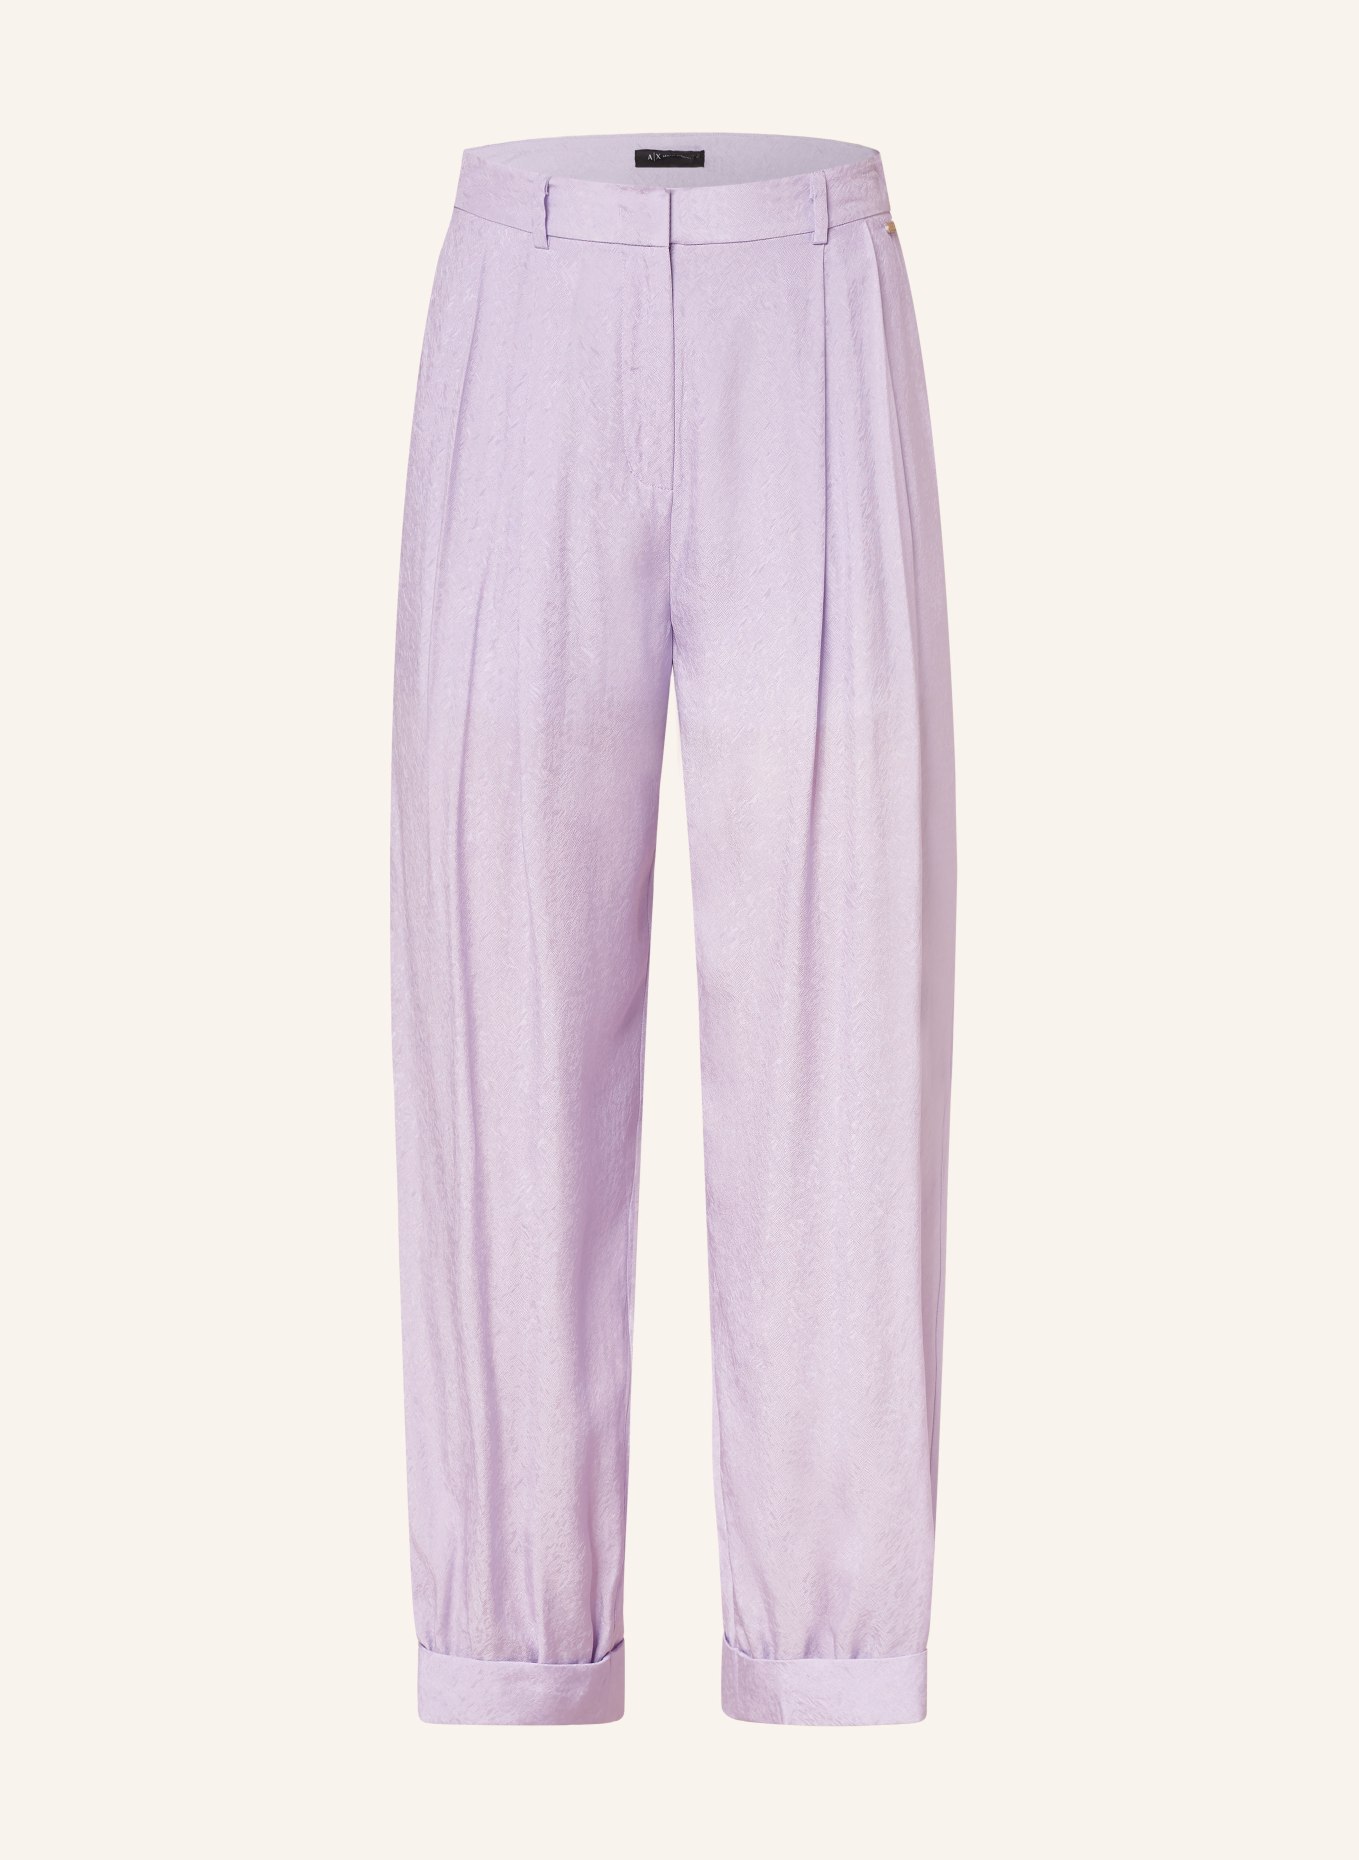 ARMANI EXCHANGE 7/8 trousers made of satin, Color: LIGHT PURPLE (Image 1)